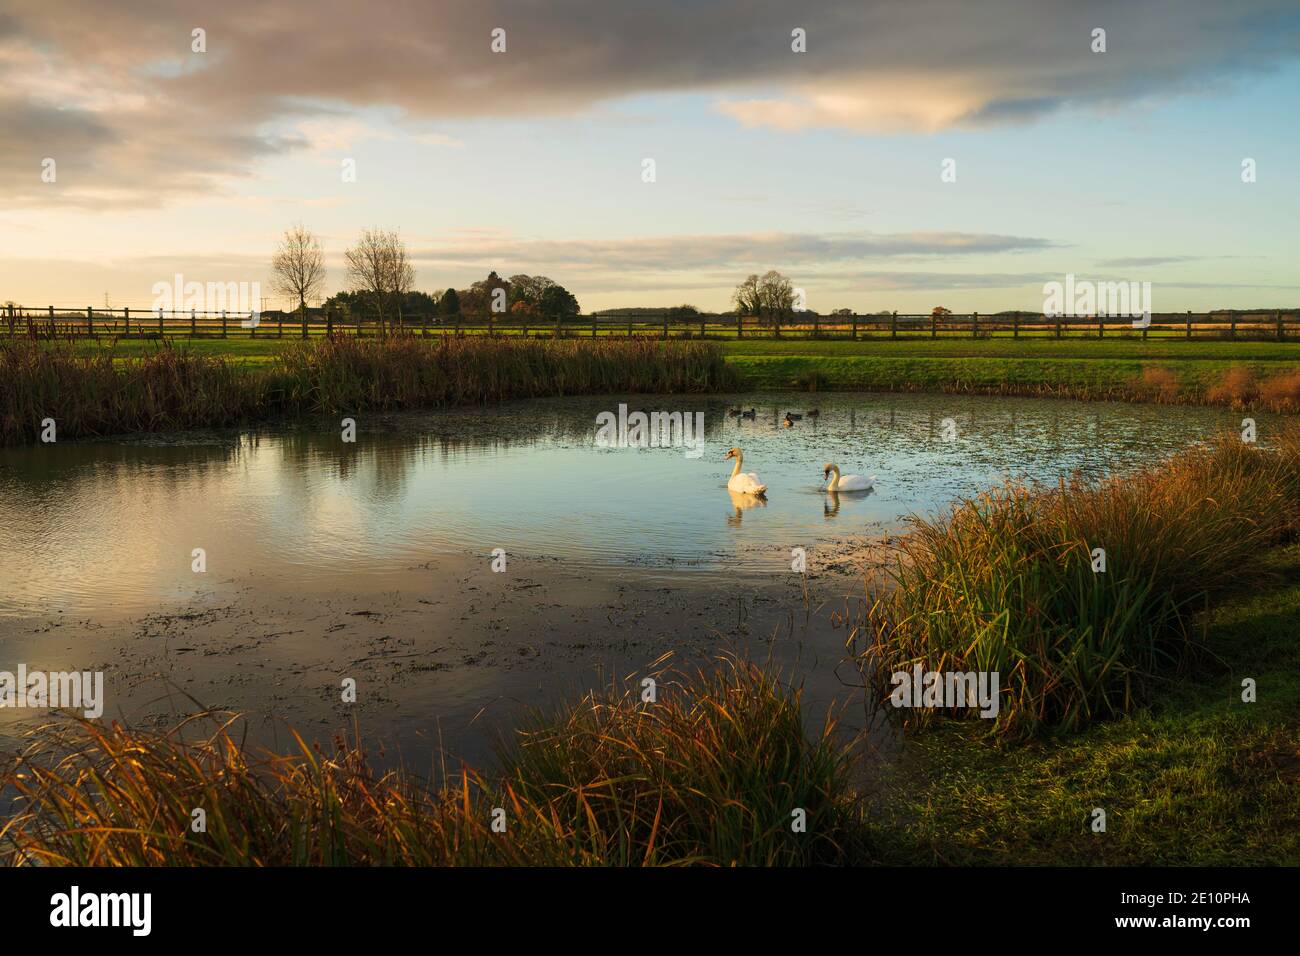 Swans swims in small pond flanked by reeds and farmland under bright cloudy sky at dawn near Minster Way, Beverley, Yorkshire, UK. Stock Photo